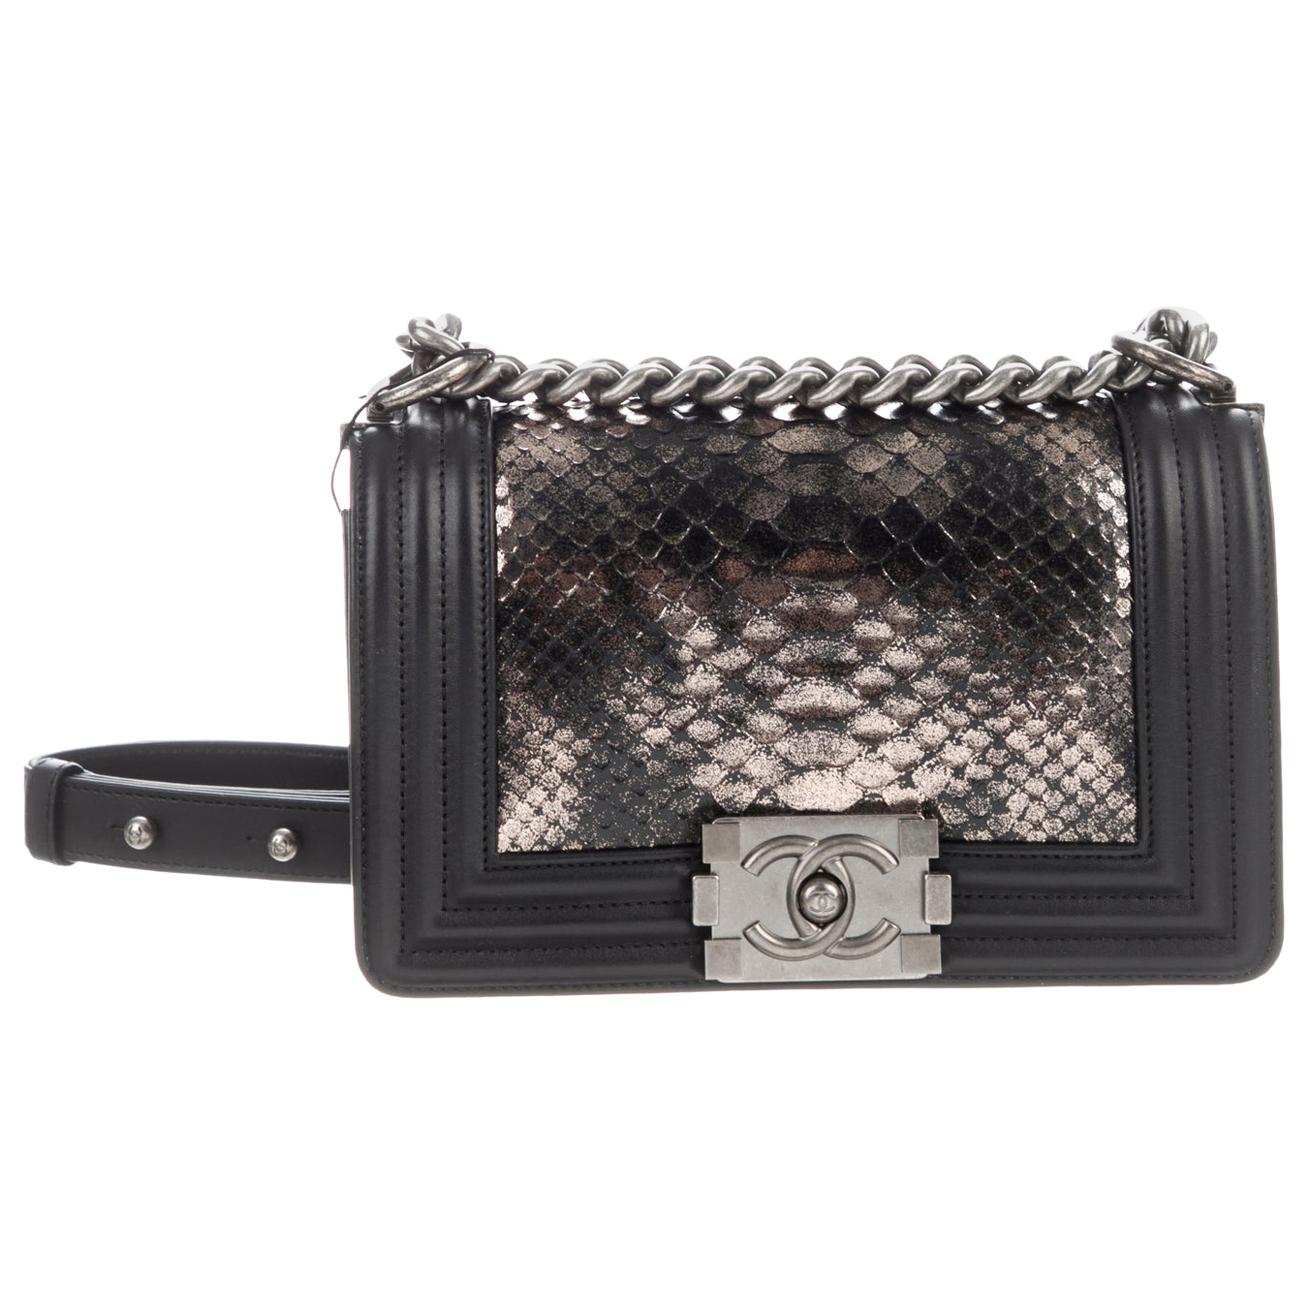 Chanel Black Leather Silver Gold Snakeskin Exotic Boy Small